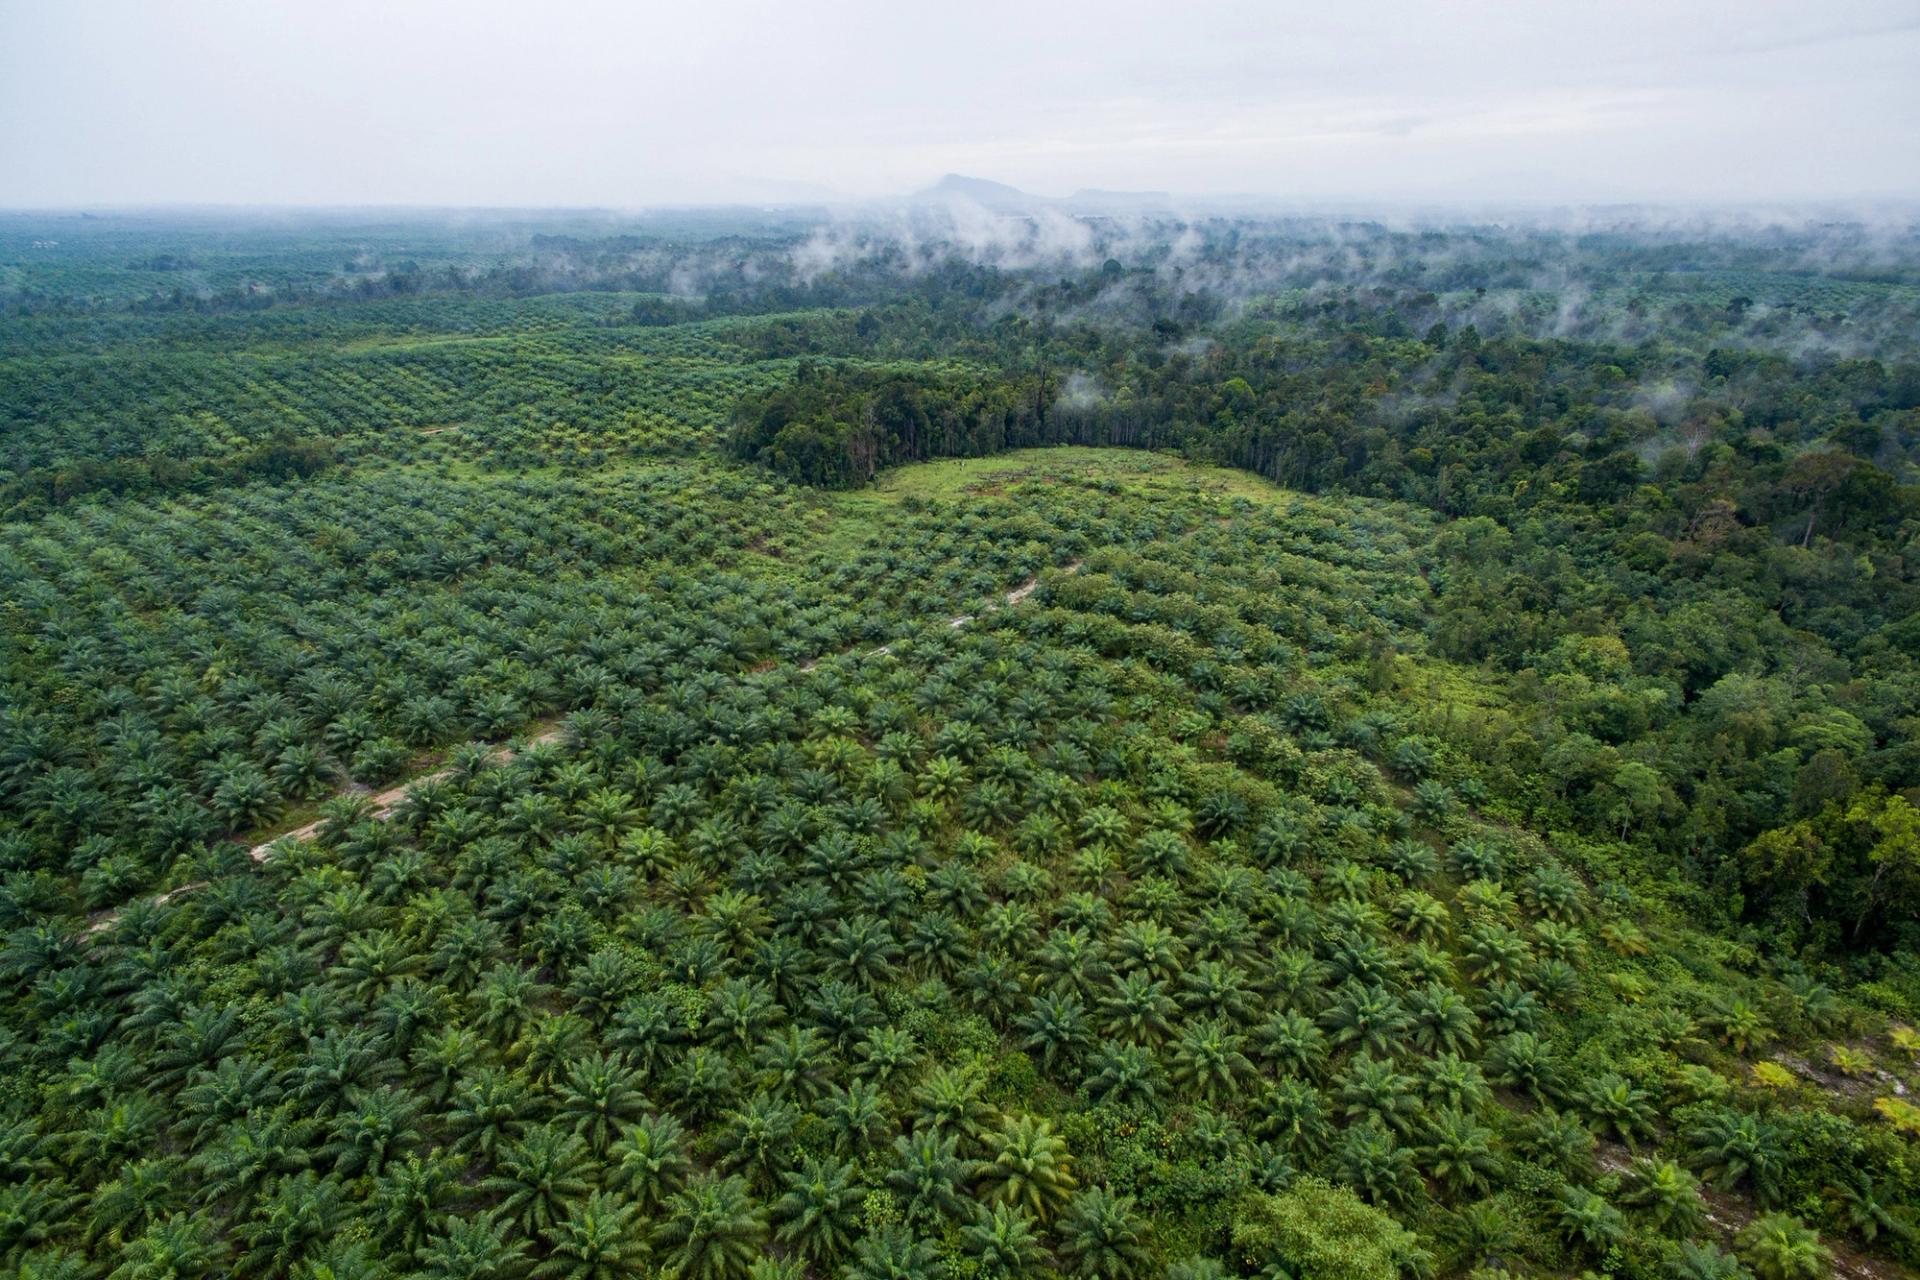 Aerial view of a palm oil plantation alongside the forest in Sentabai Village, West Kalimantan, Indonesia, 2017